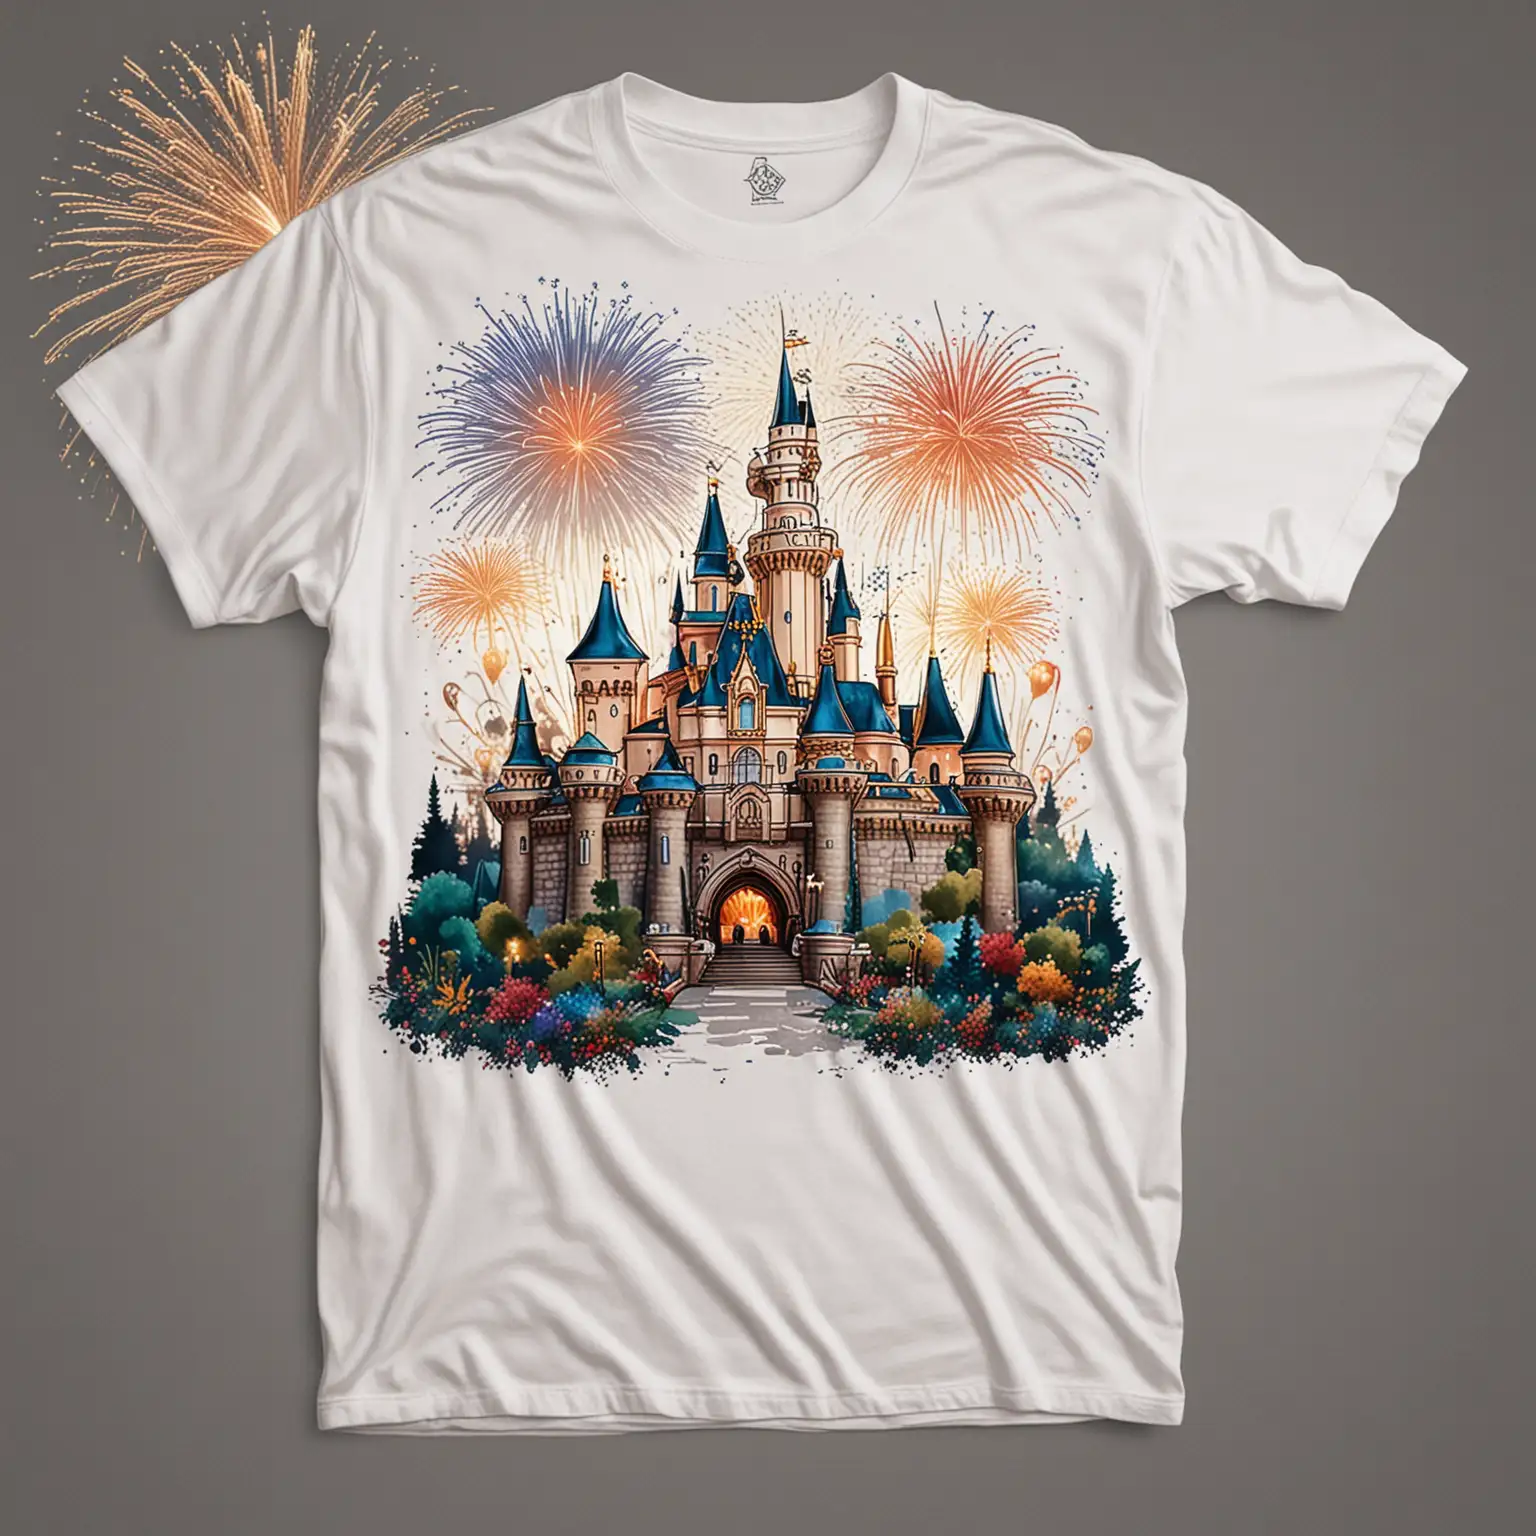 I need a mockup for a white t-shirt digital illustration to celebrate a trip to Disneyland in Anaheim California, full color, fireworks, finely detailed, small castle, white background, twilight --no text, 16k